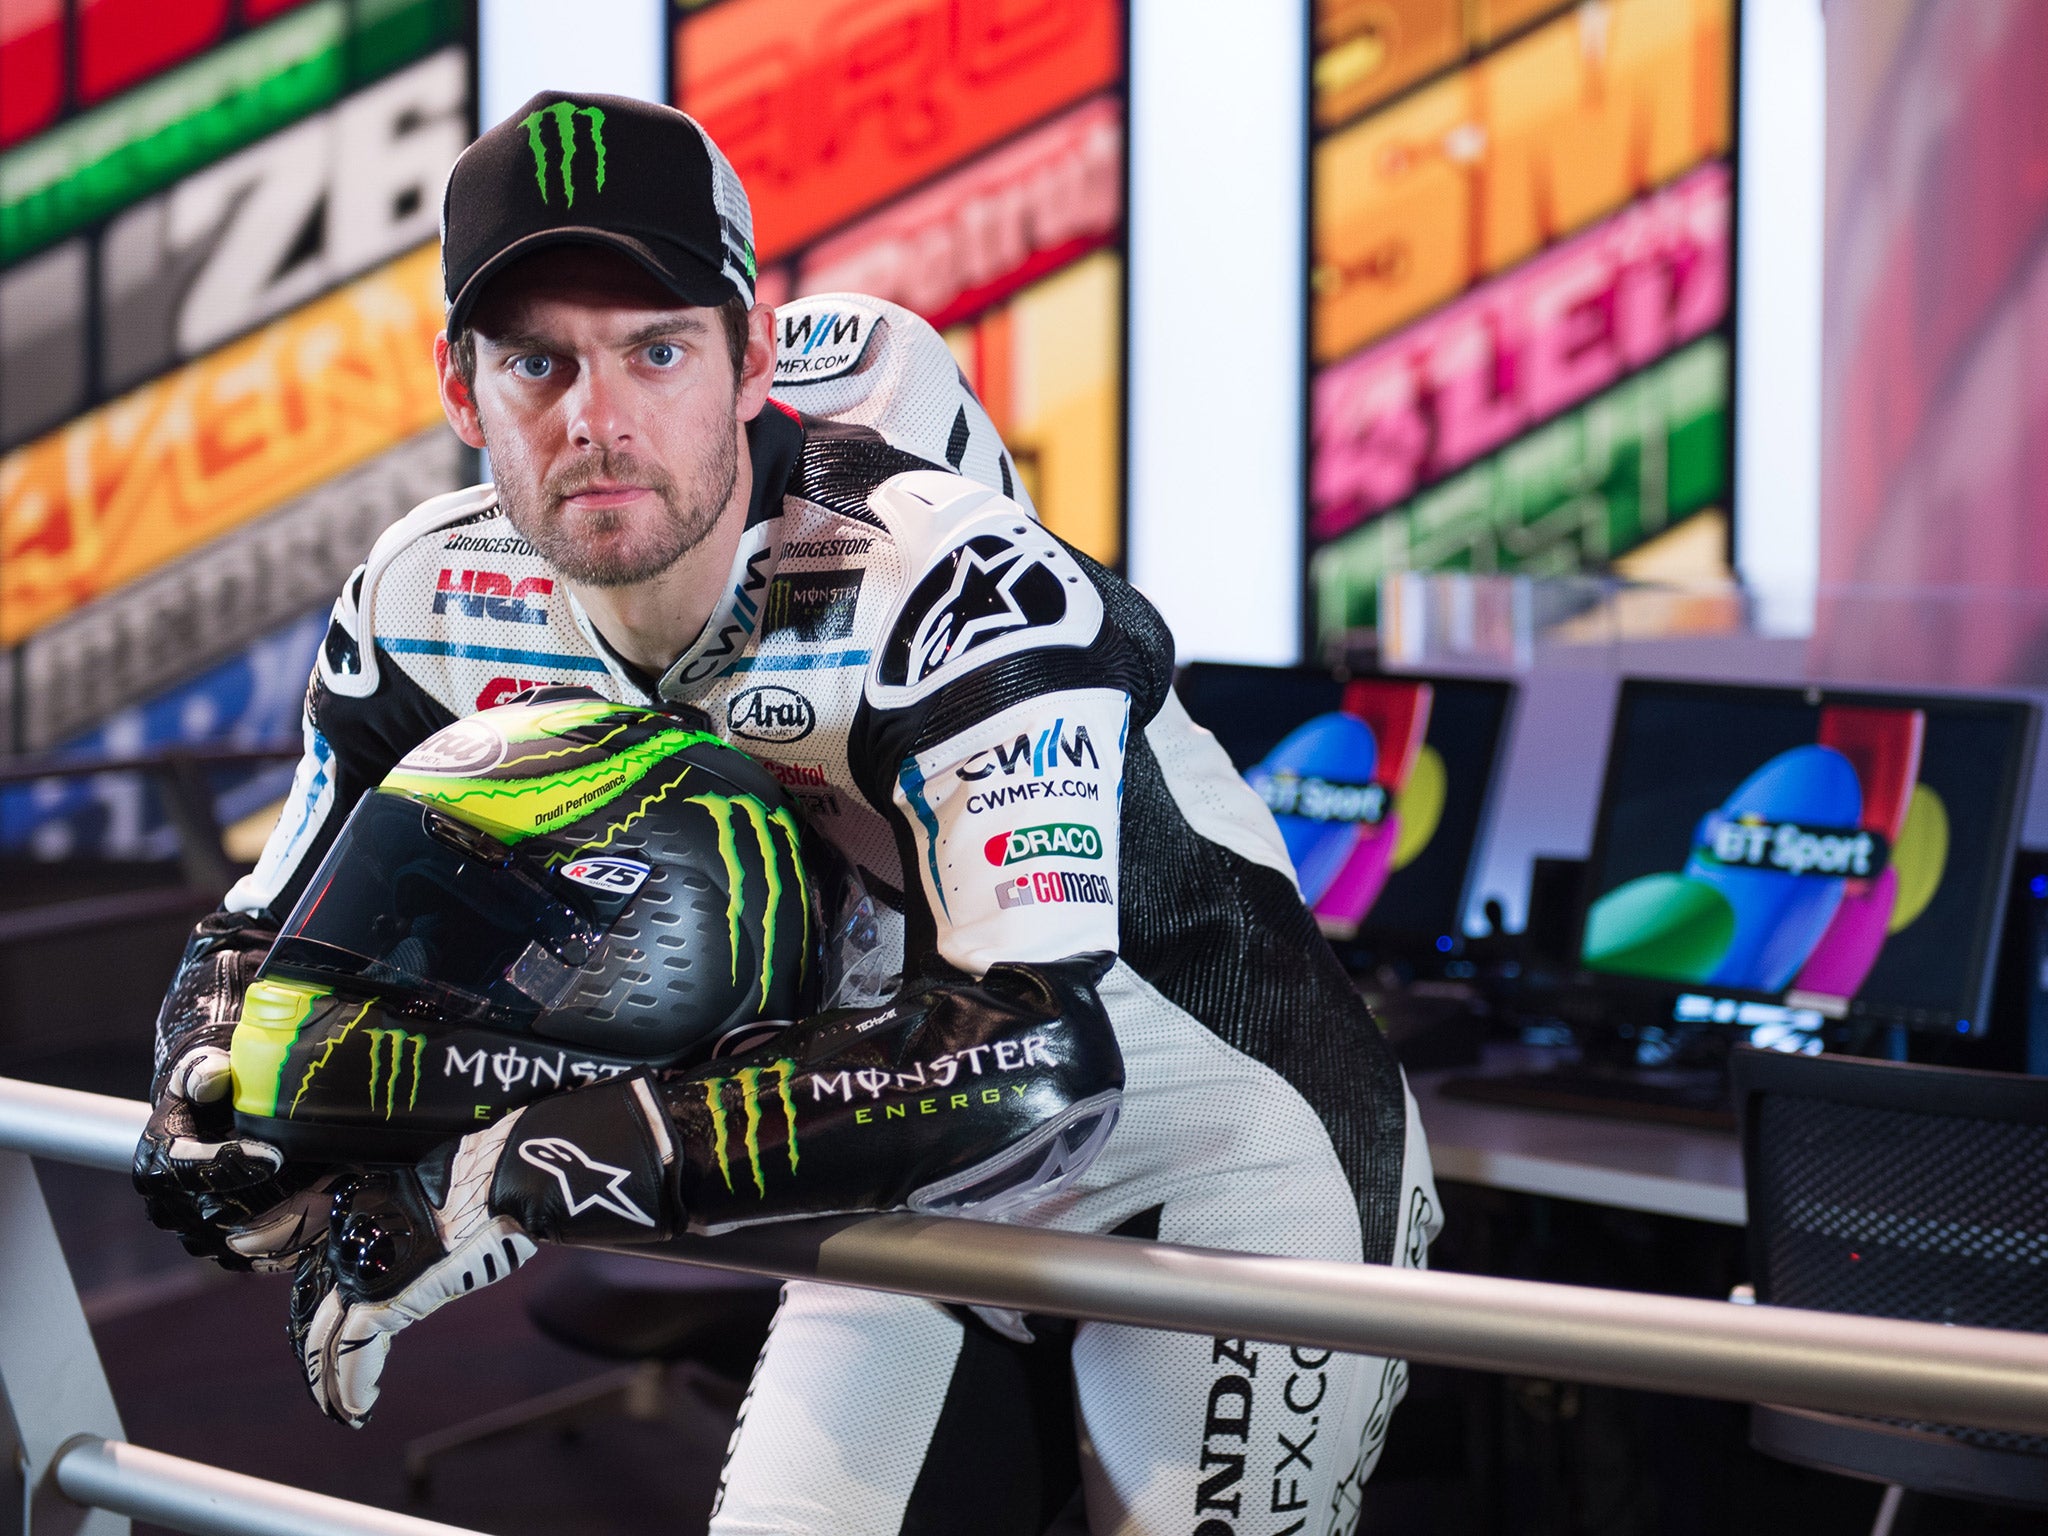 Cal Crutchlow won the Czech Grand Prix to end Britain's 35-year drought without a MotoGP winner